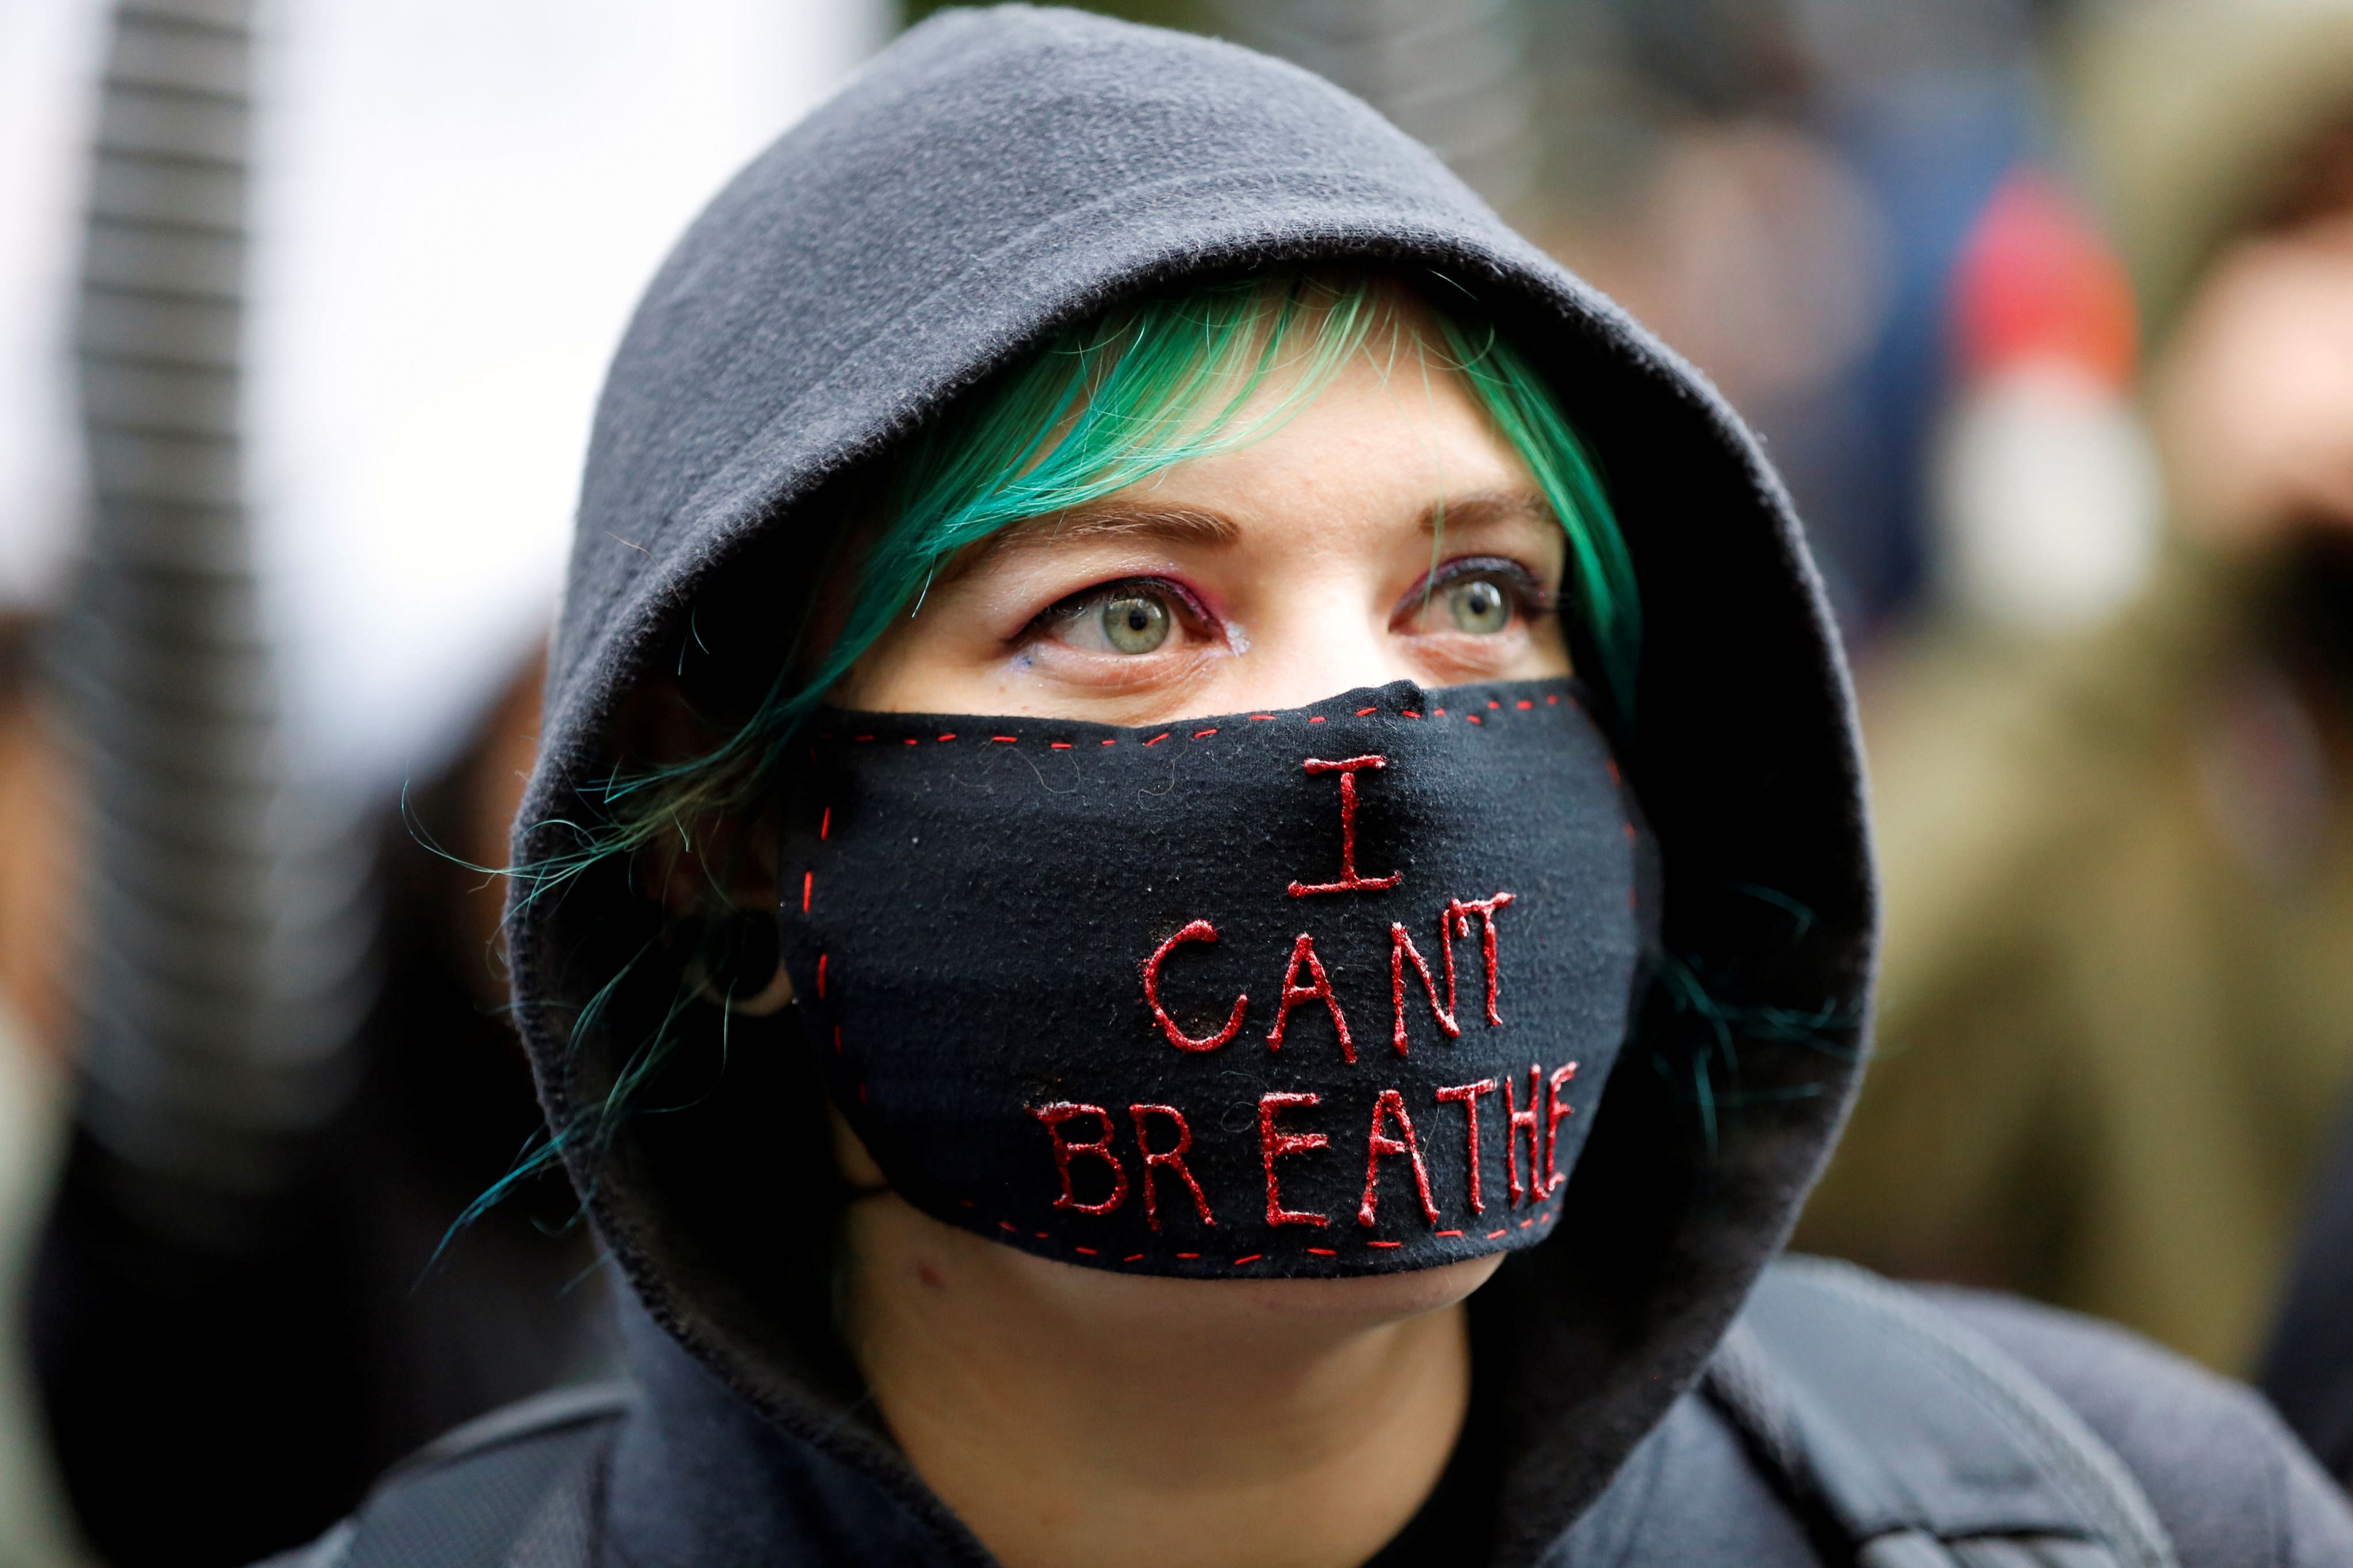 A protester wearing a face mask attends a rally against the death in Minneapolis police custody of George Floyd, in Portland, Oregon. (Reuters photo)